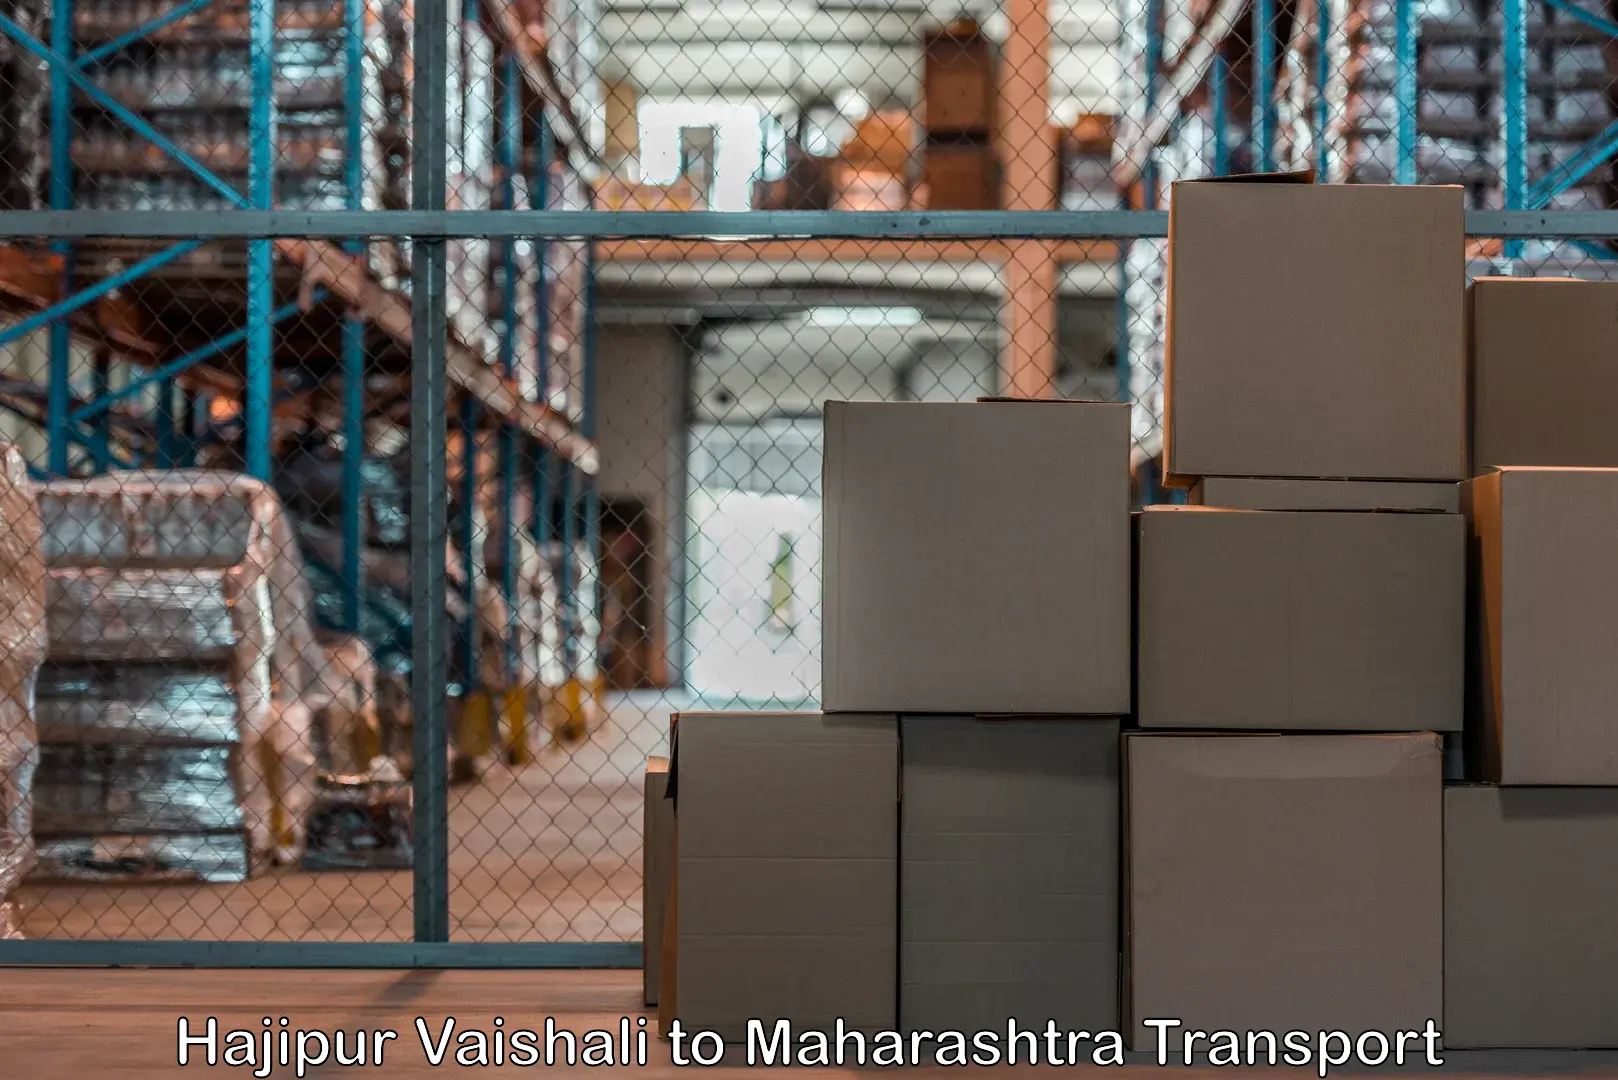 Air freight transport services in Hajipur Vaishali to Gondia